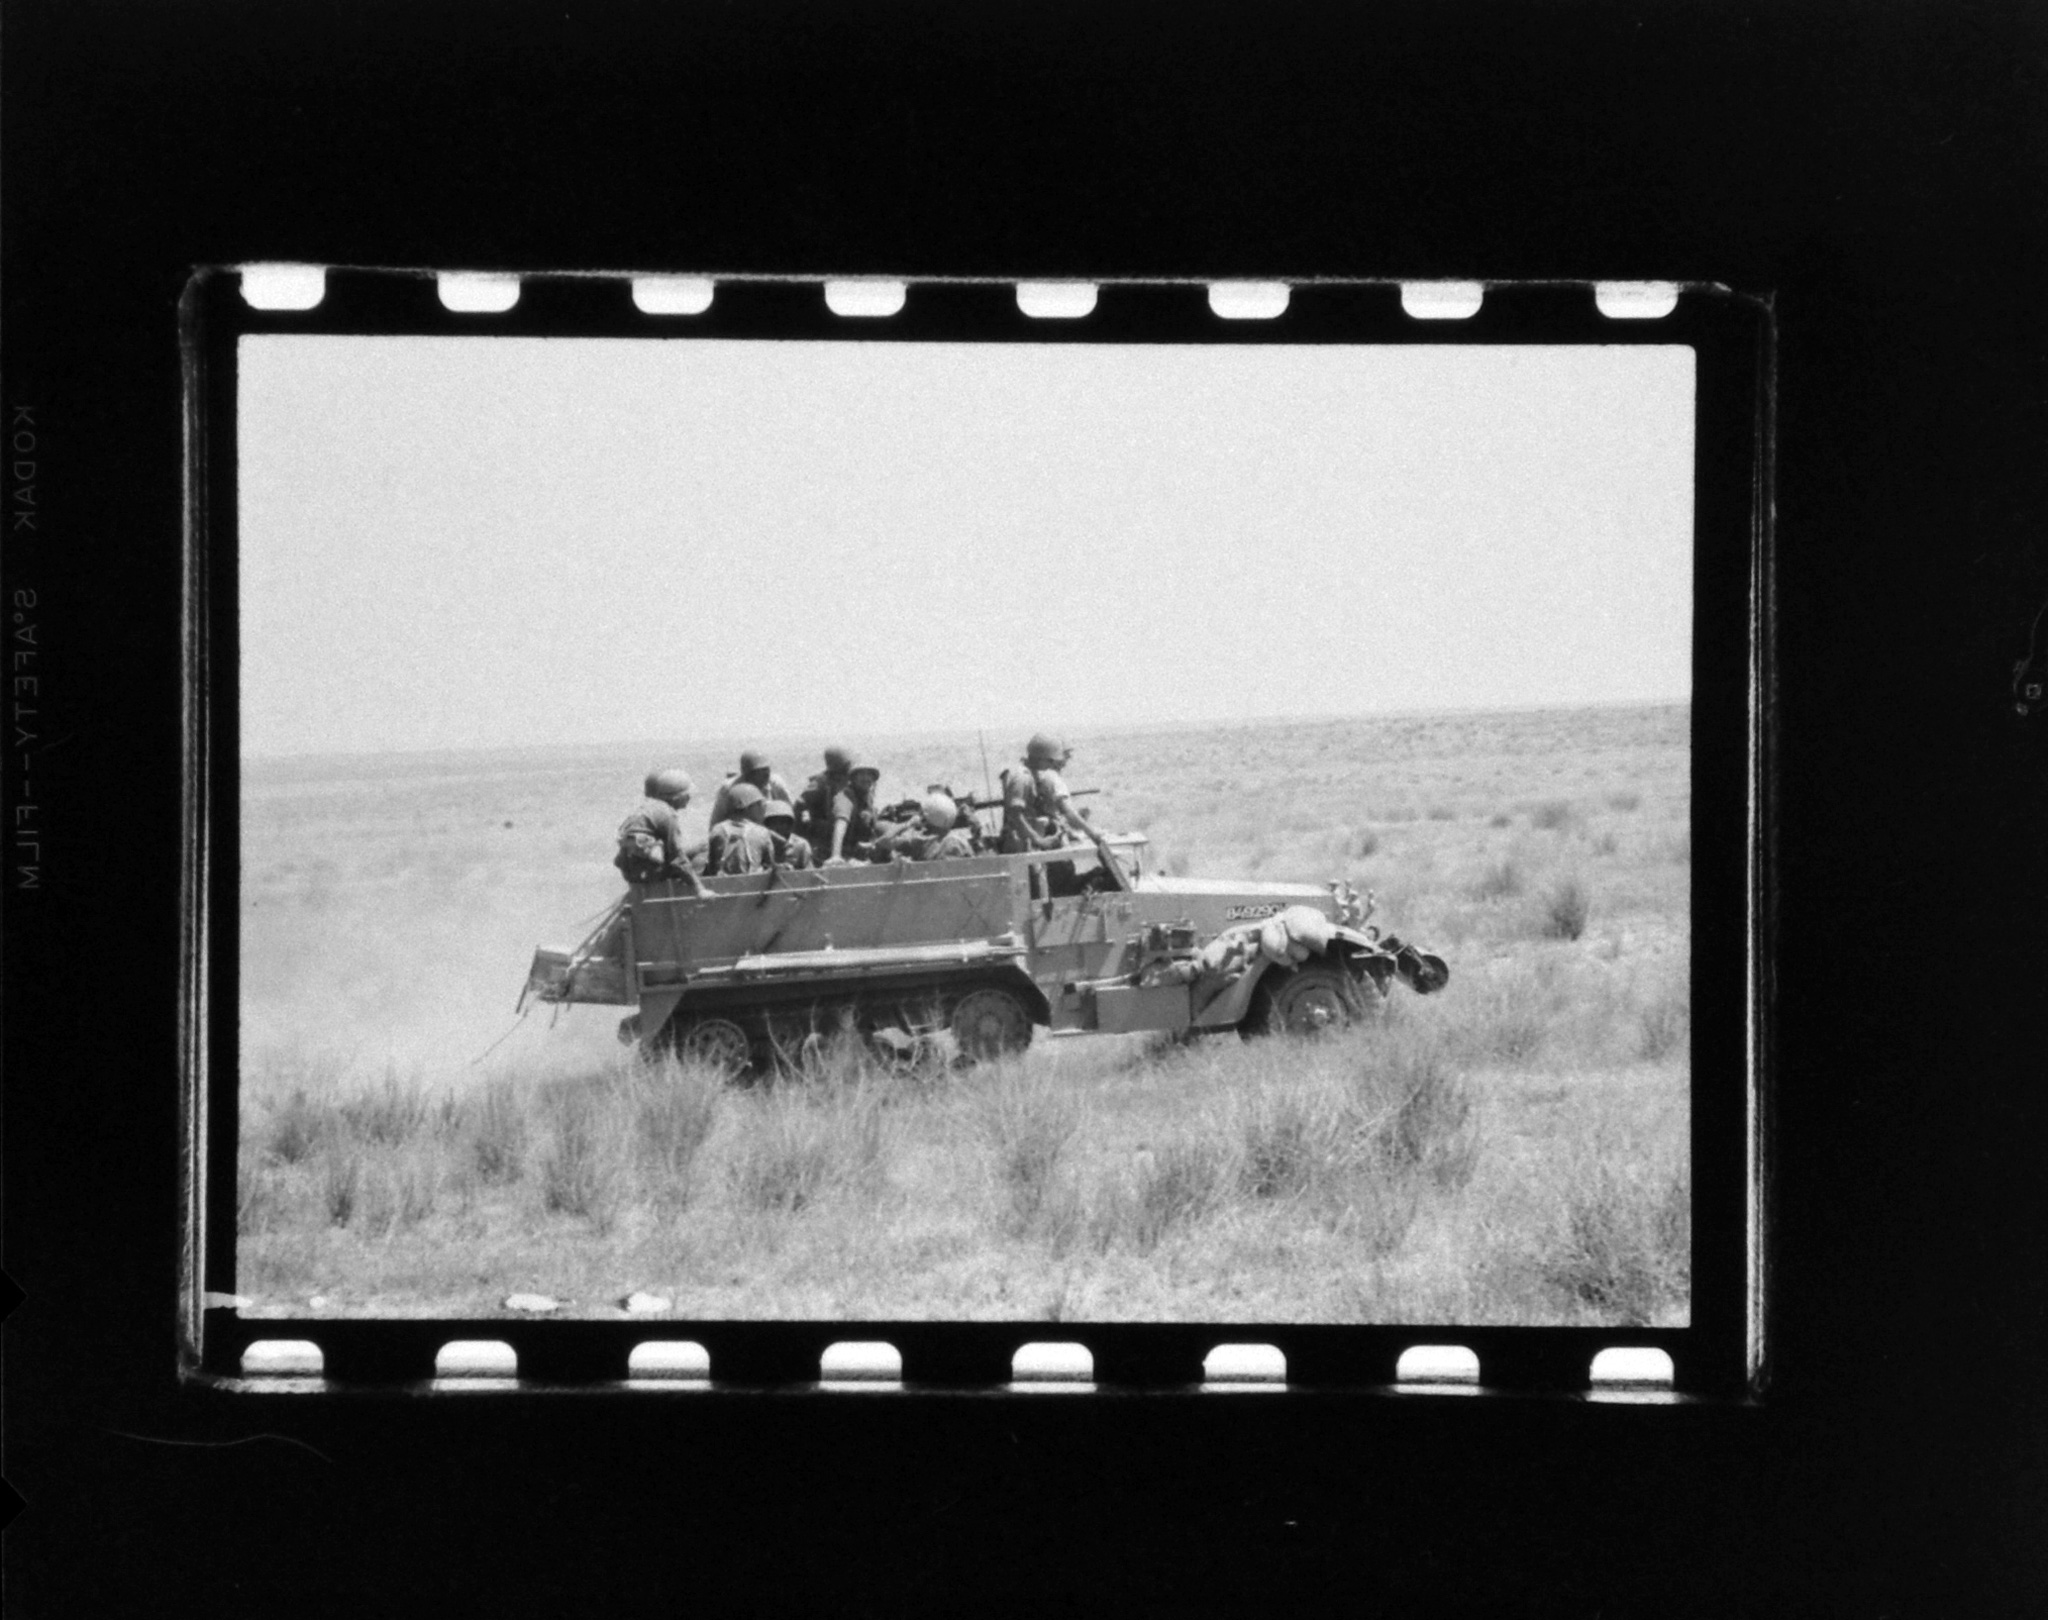 This image of an Israeli military vehicle as it heads towards Gaza, then part of Egypt, was one of the last 23 frames taken by Paul Schutzer. He was killed on June 5, 1967, the first day of the Arab-Israeli Six Day War, when the half-track personnel carrier he was riding in took a direct hit from an Egyptian antitank shell.